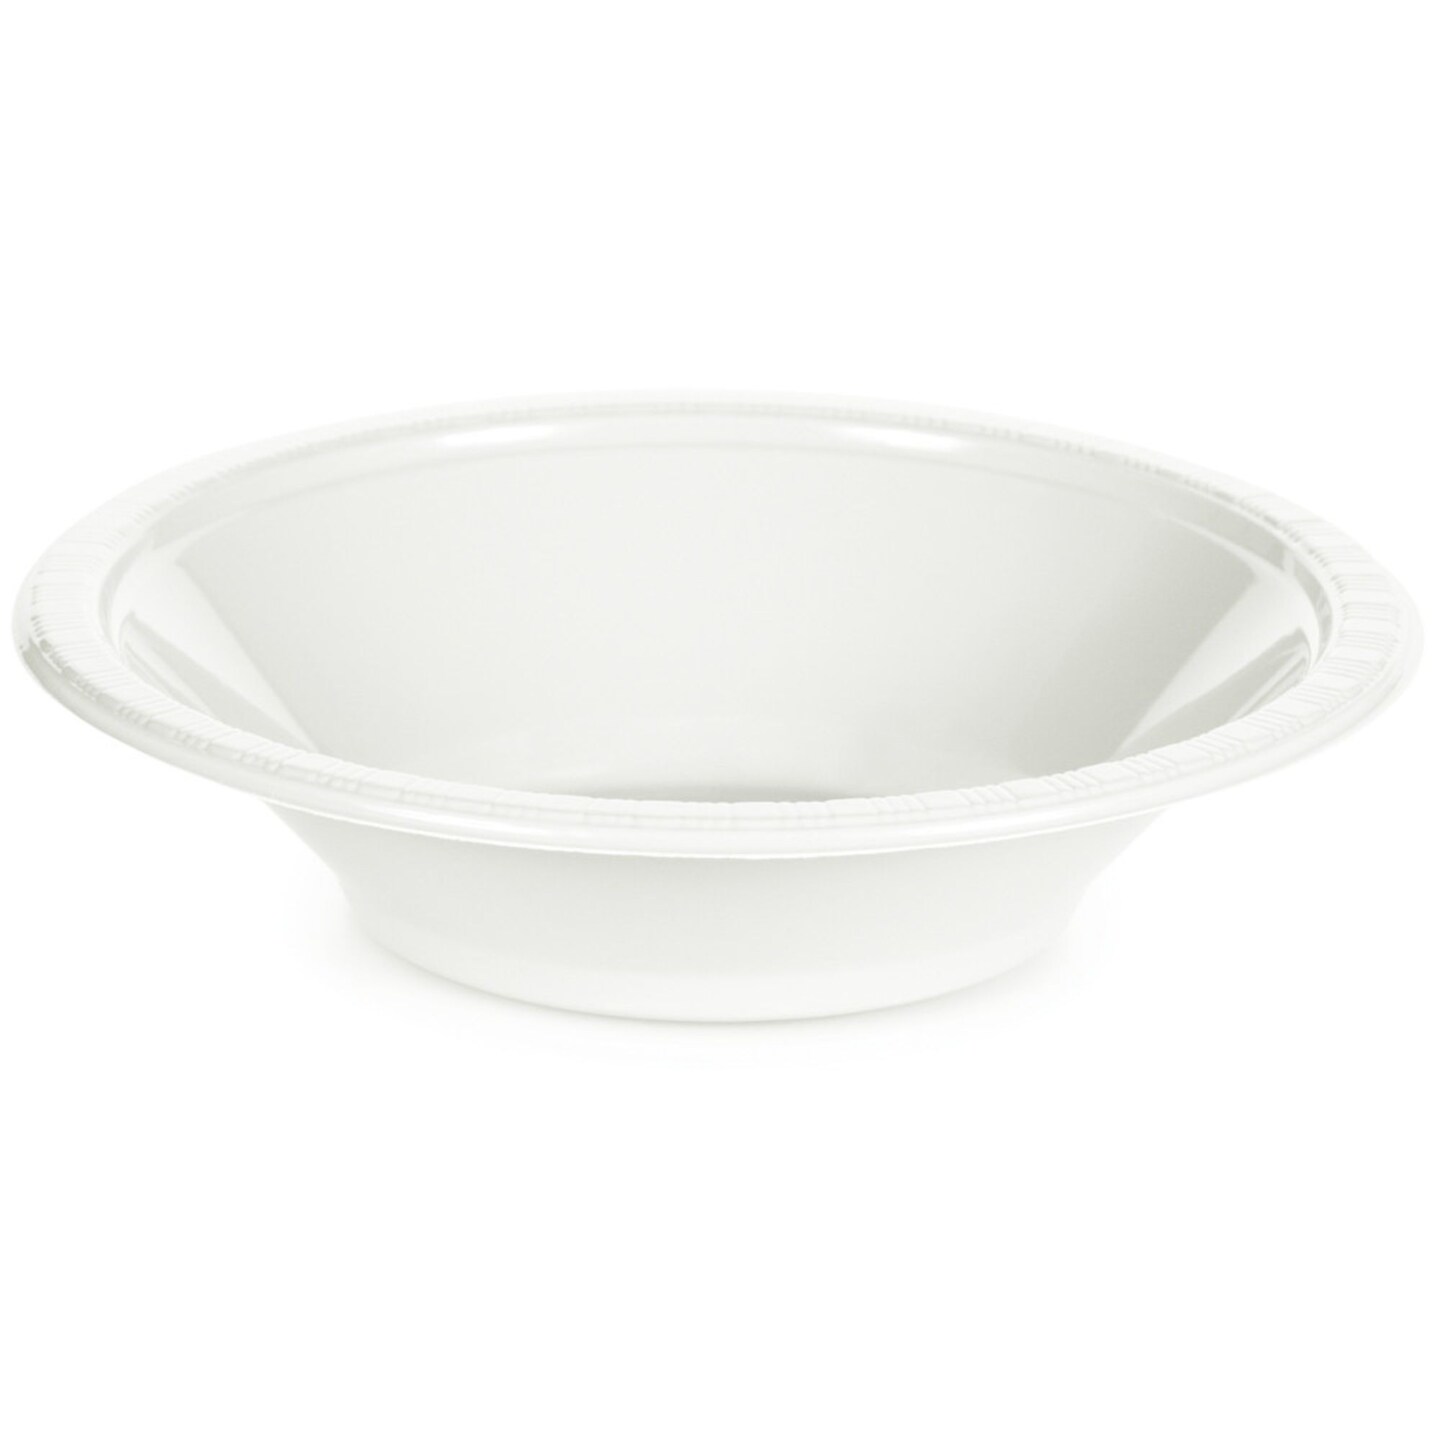 Party Central Club Pack of 240 White Round Disposable Party Bowls 12 oz.